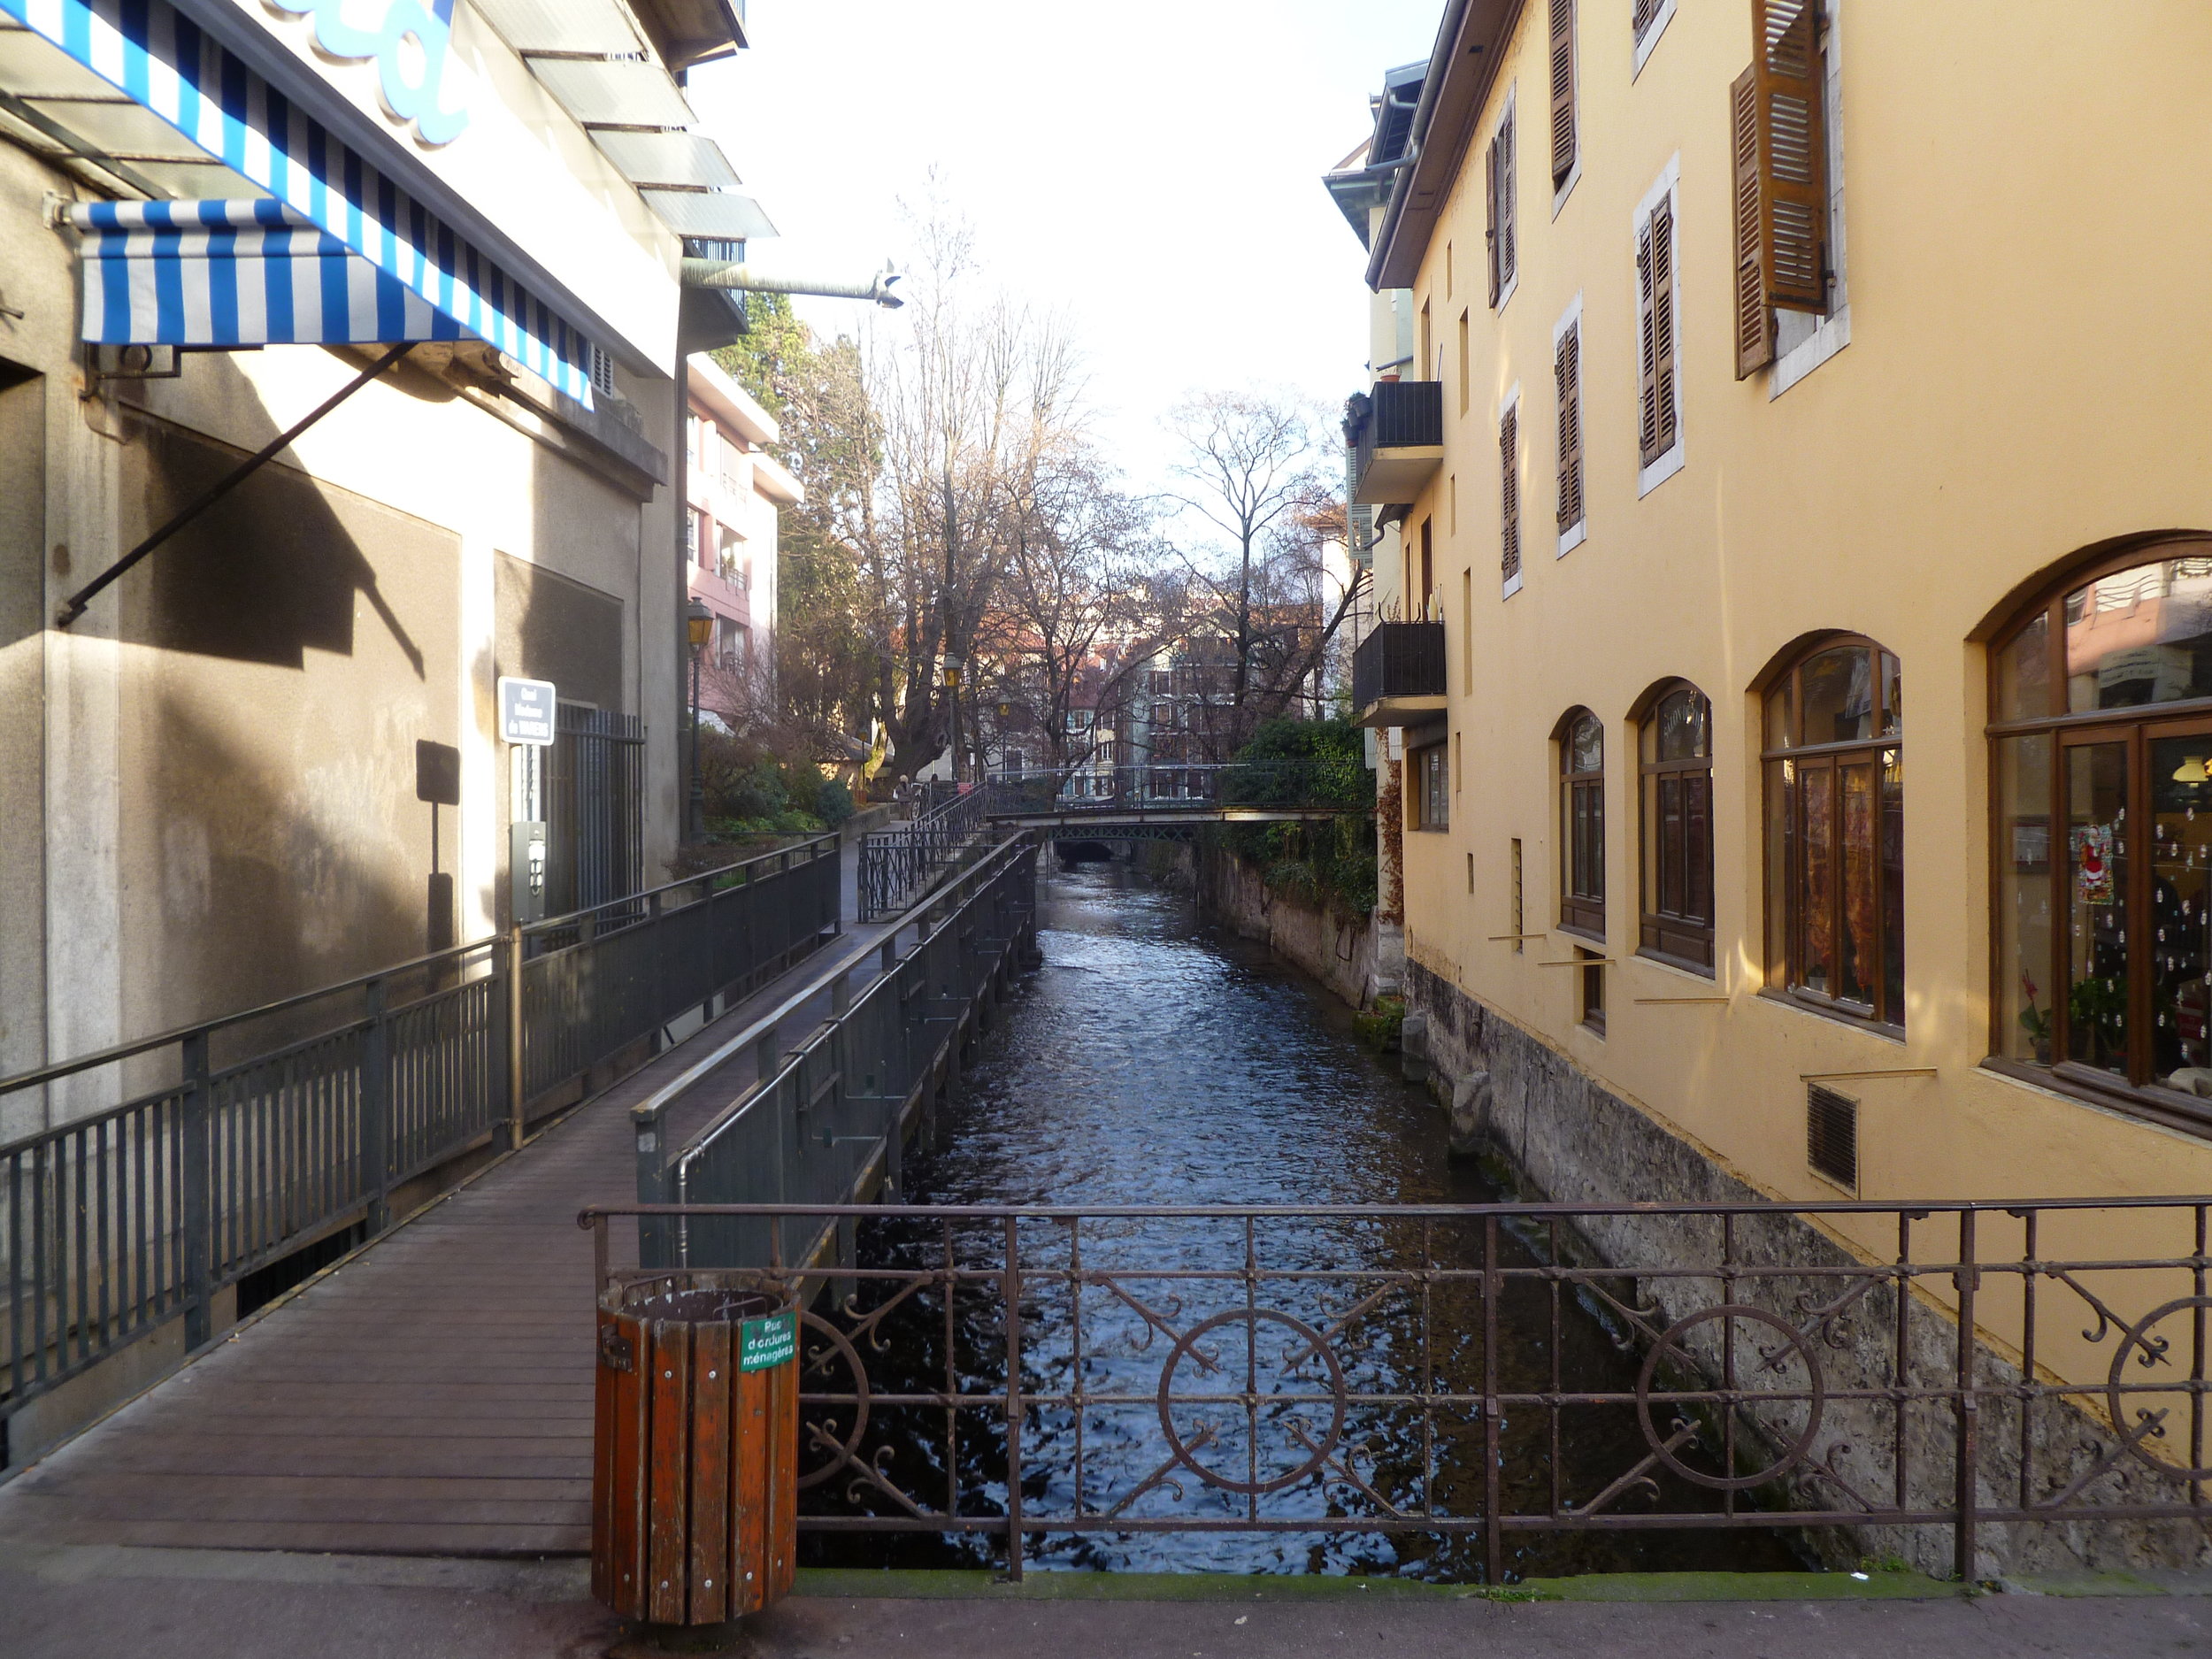 Tiny street over the canal.